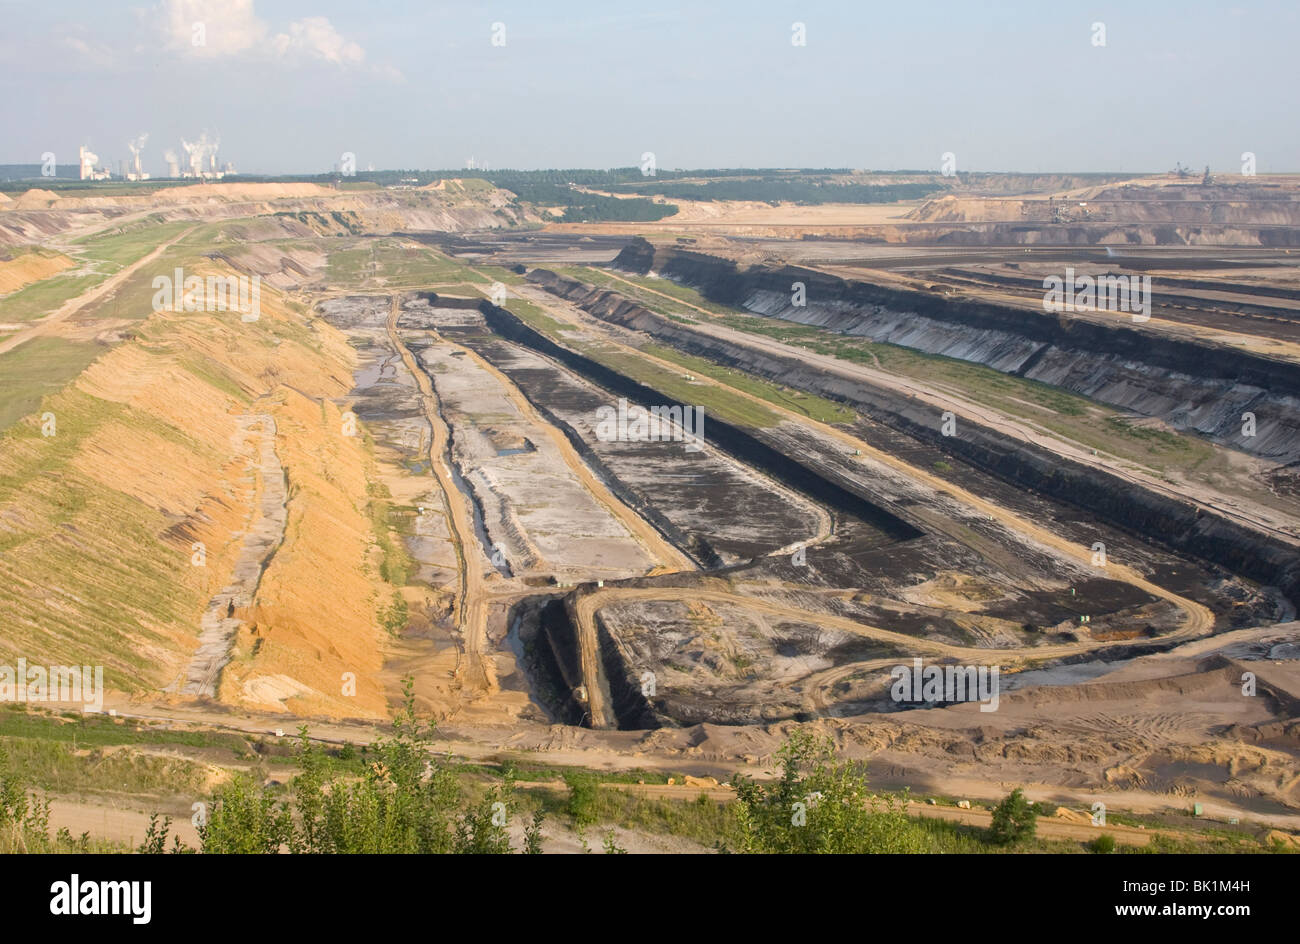 Opencast mining with coal power station Stock Photo